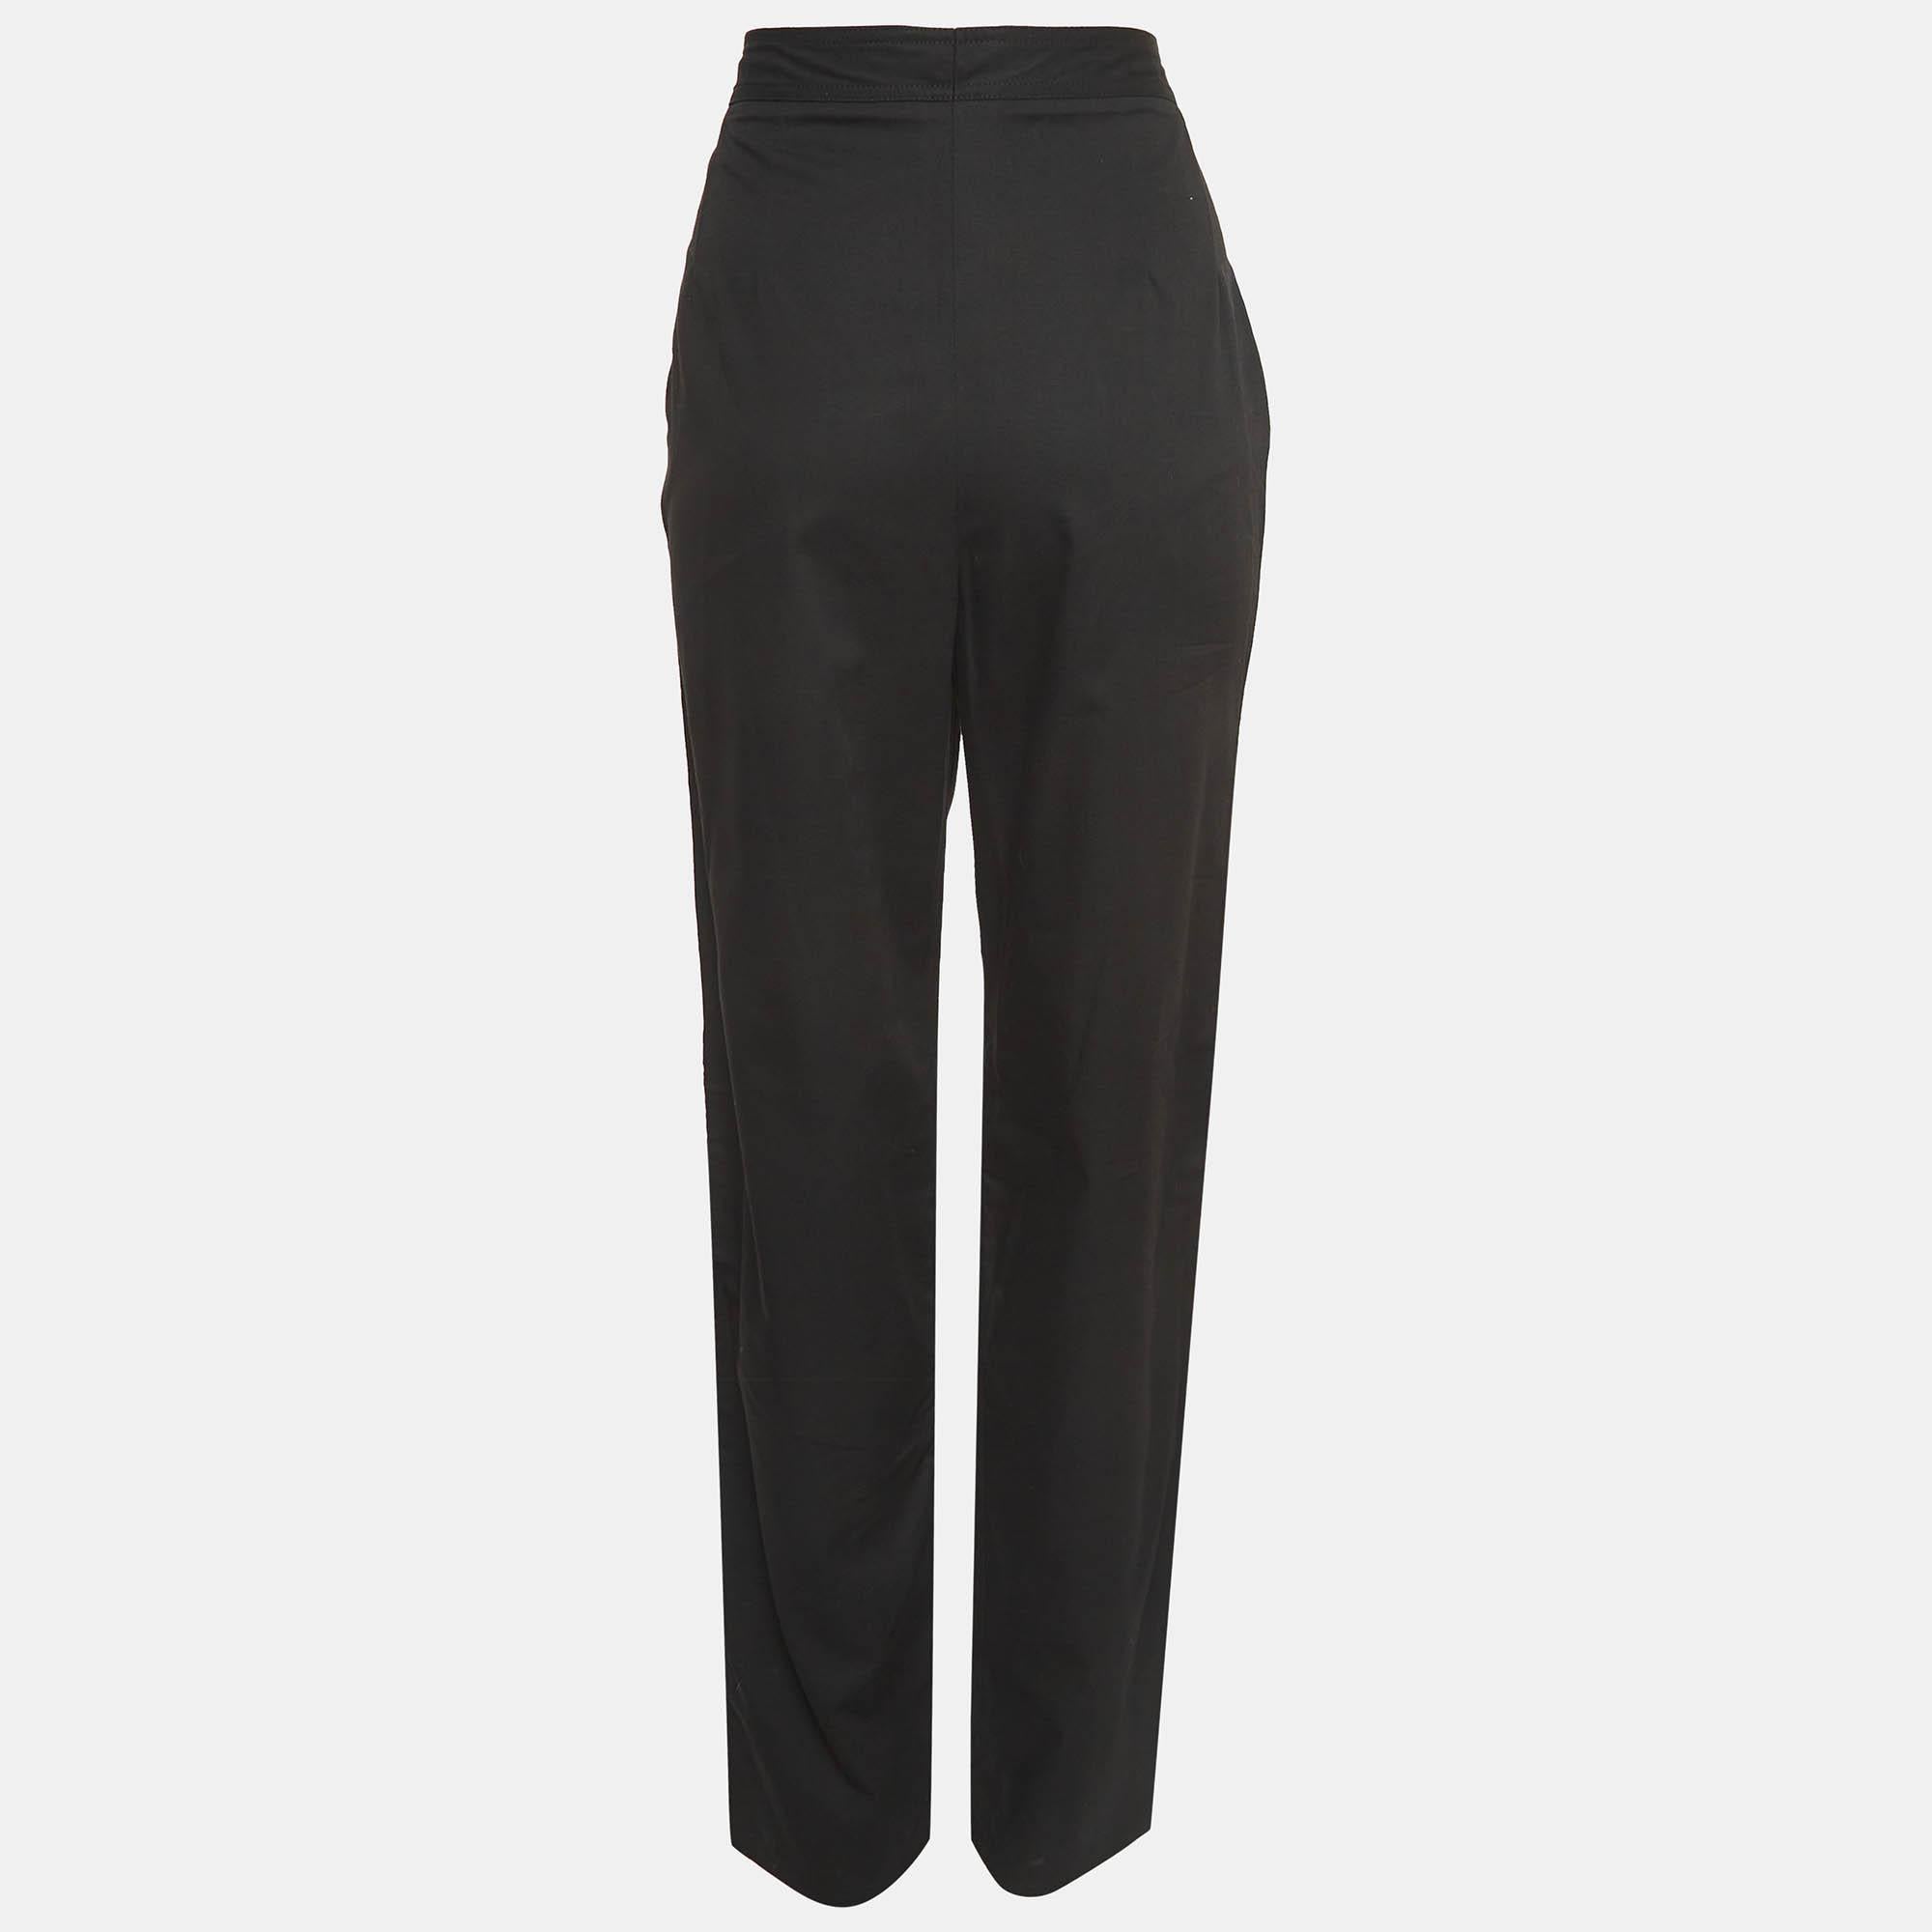 Enhance your formal attire with this pair of trousers. Designed into a superb silhouette and fit, this pair of trousers will definitely make you look elegant.

Includes: Brand tag

